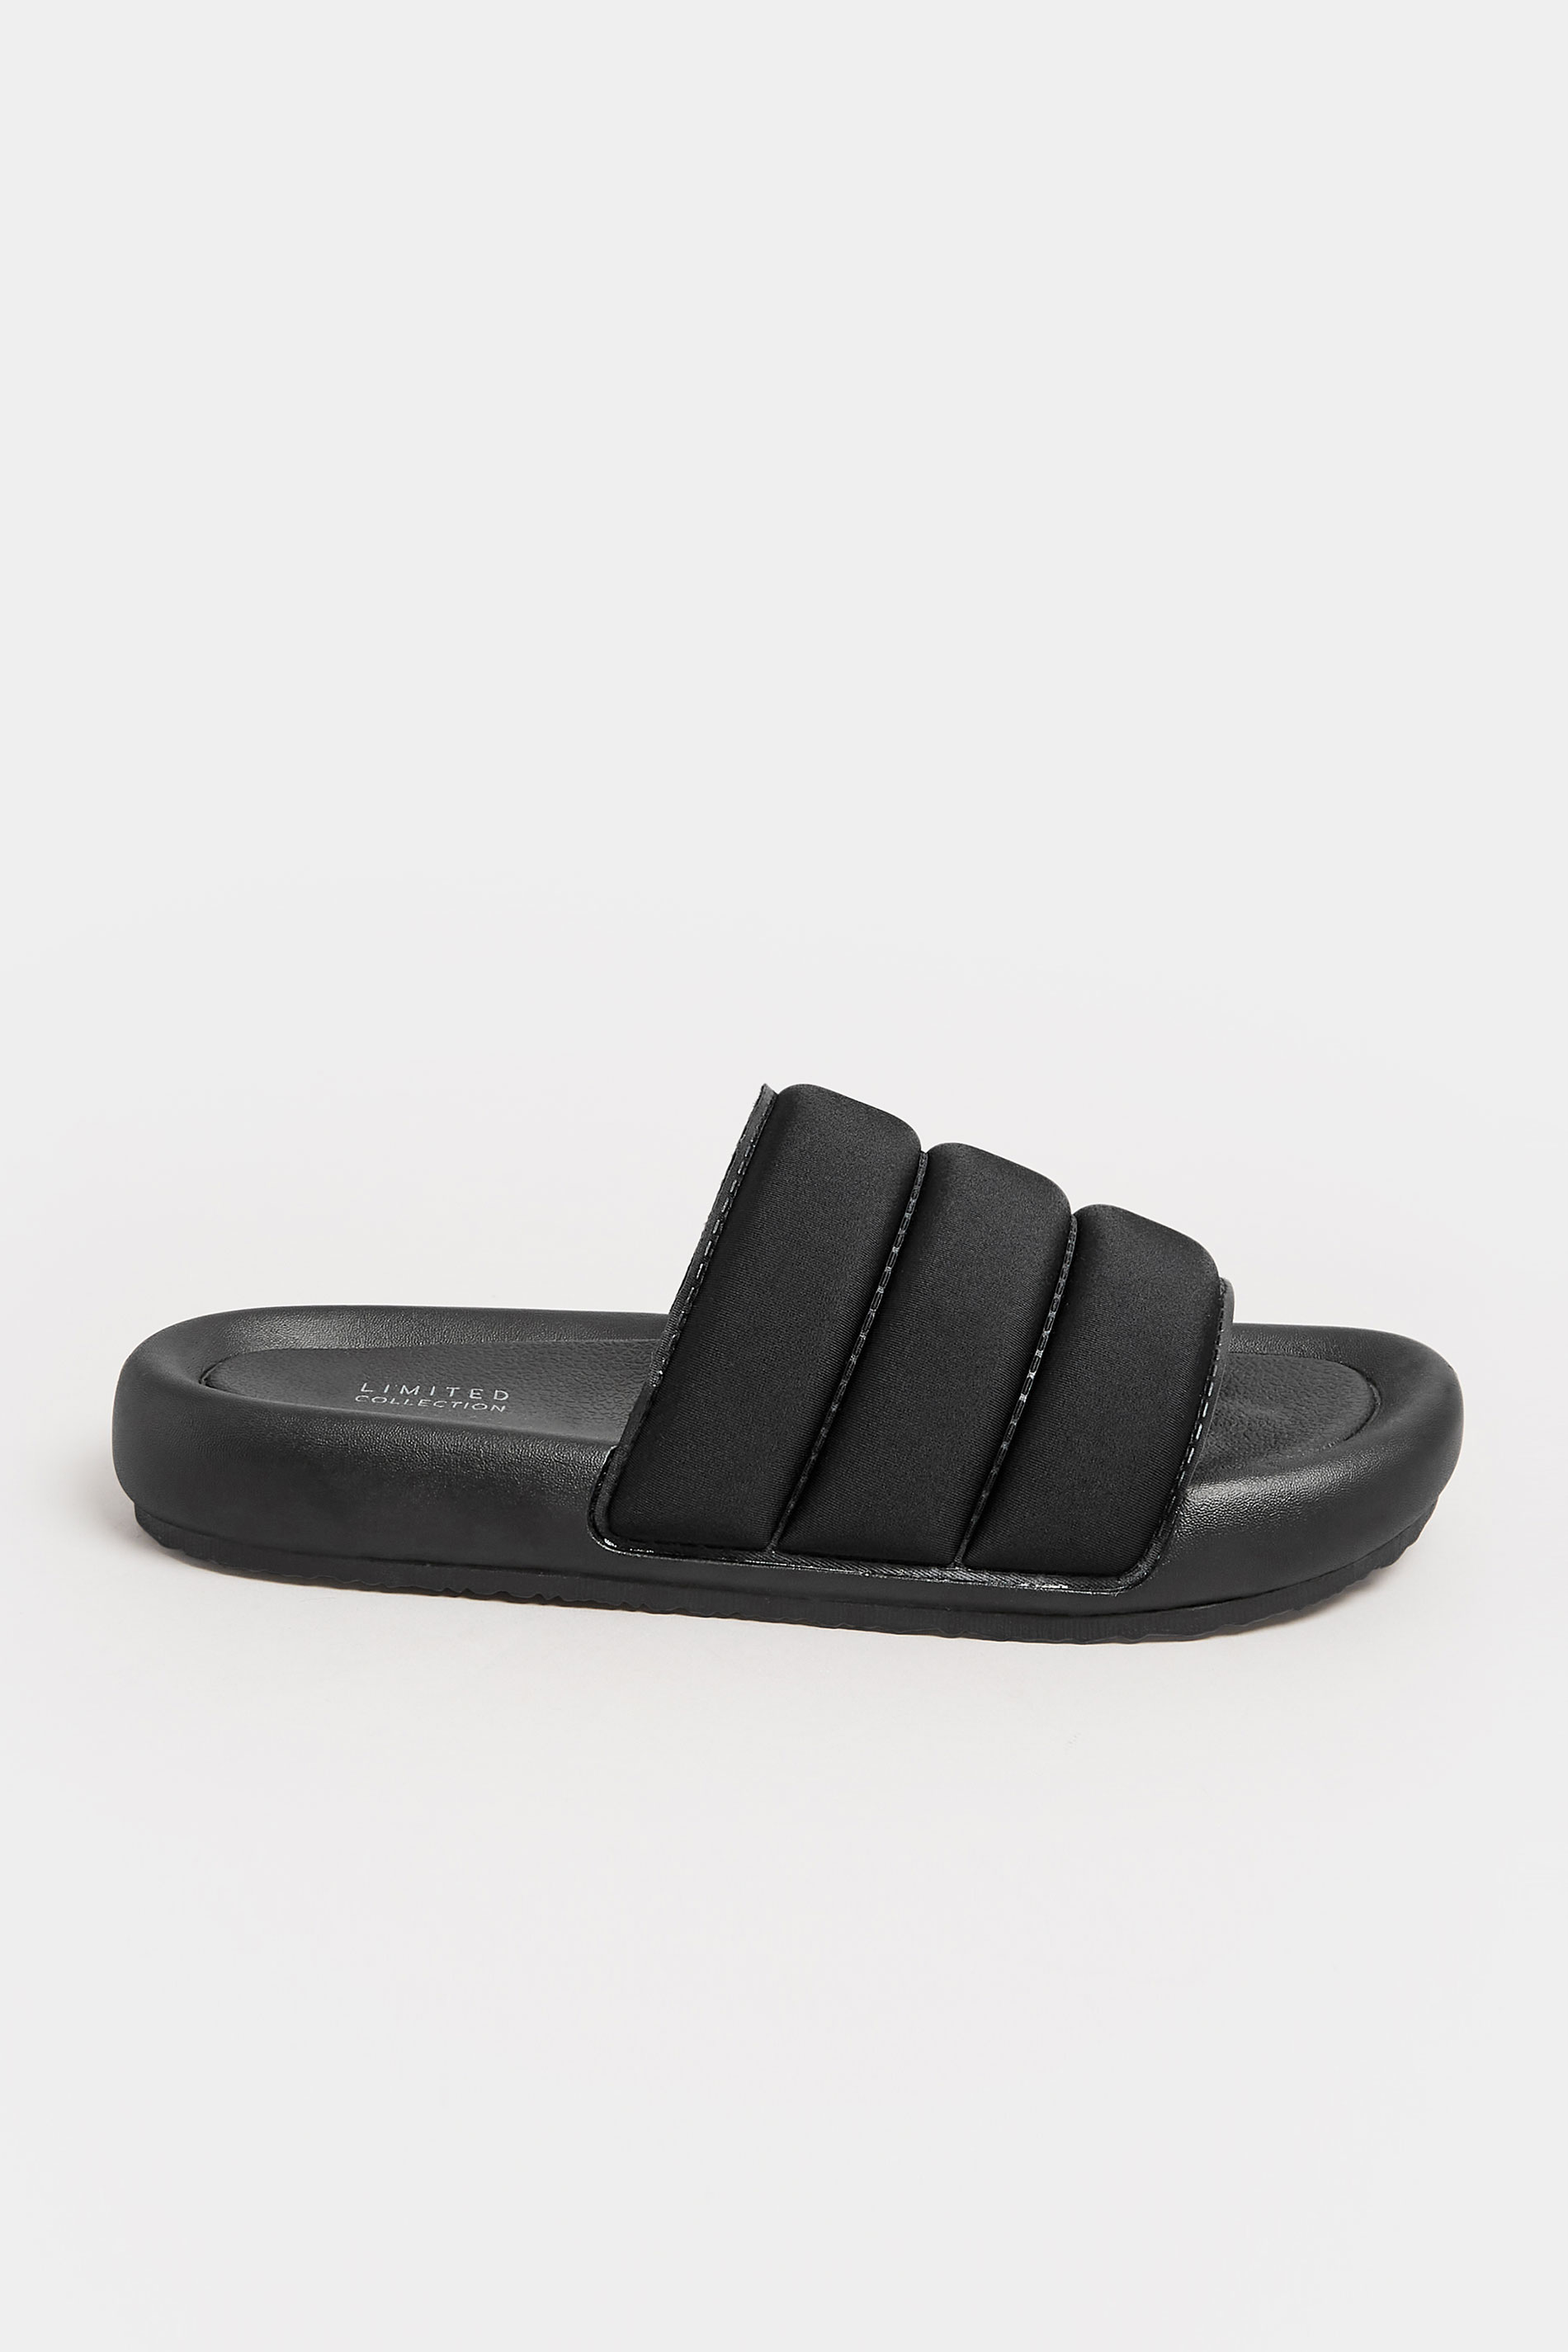 LIMITED COLLECTION Black Padded Sliders In Wide E Fit | Yours Clothing